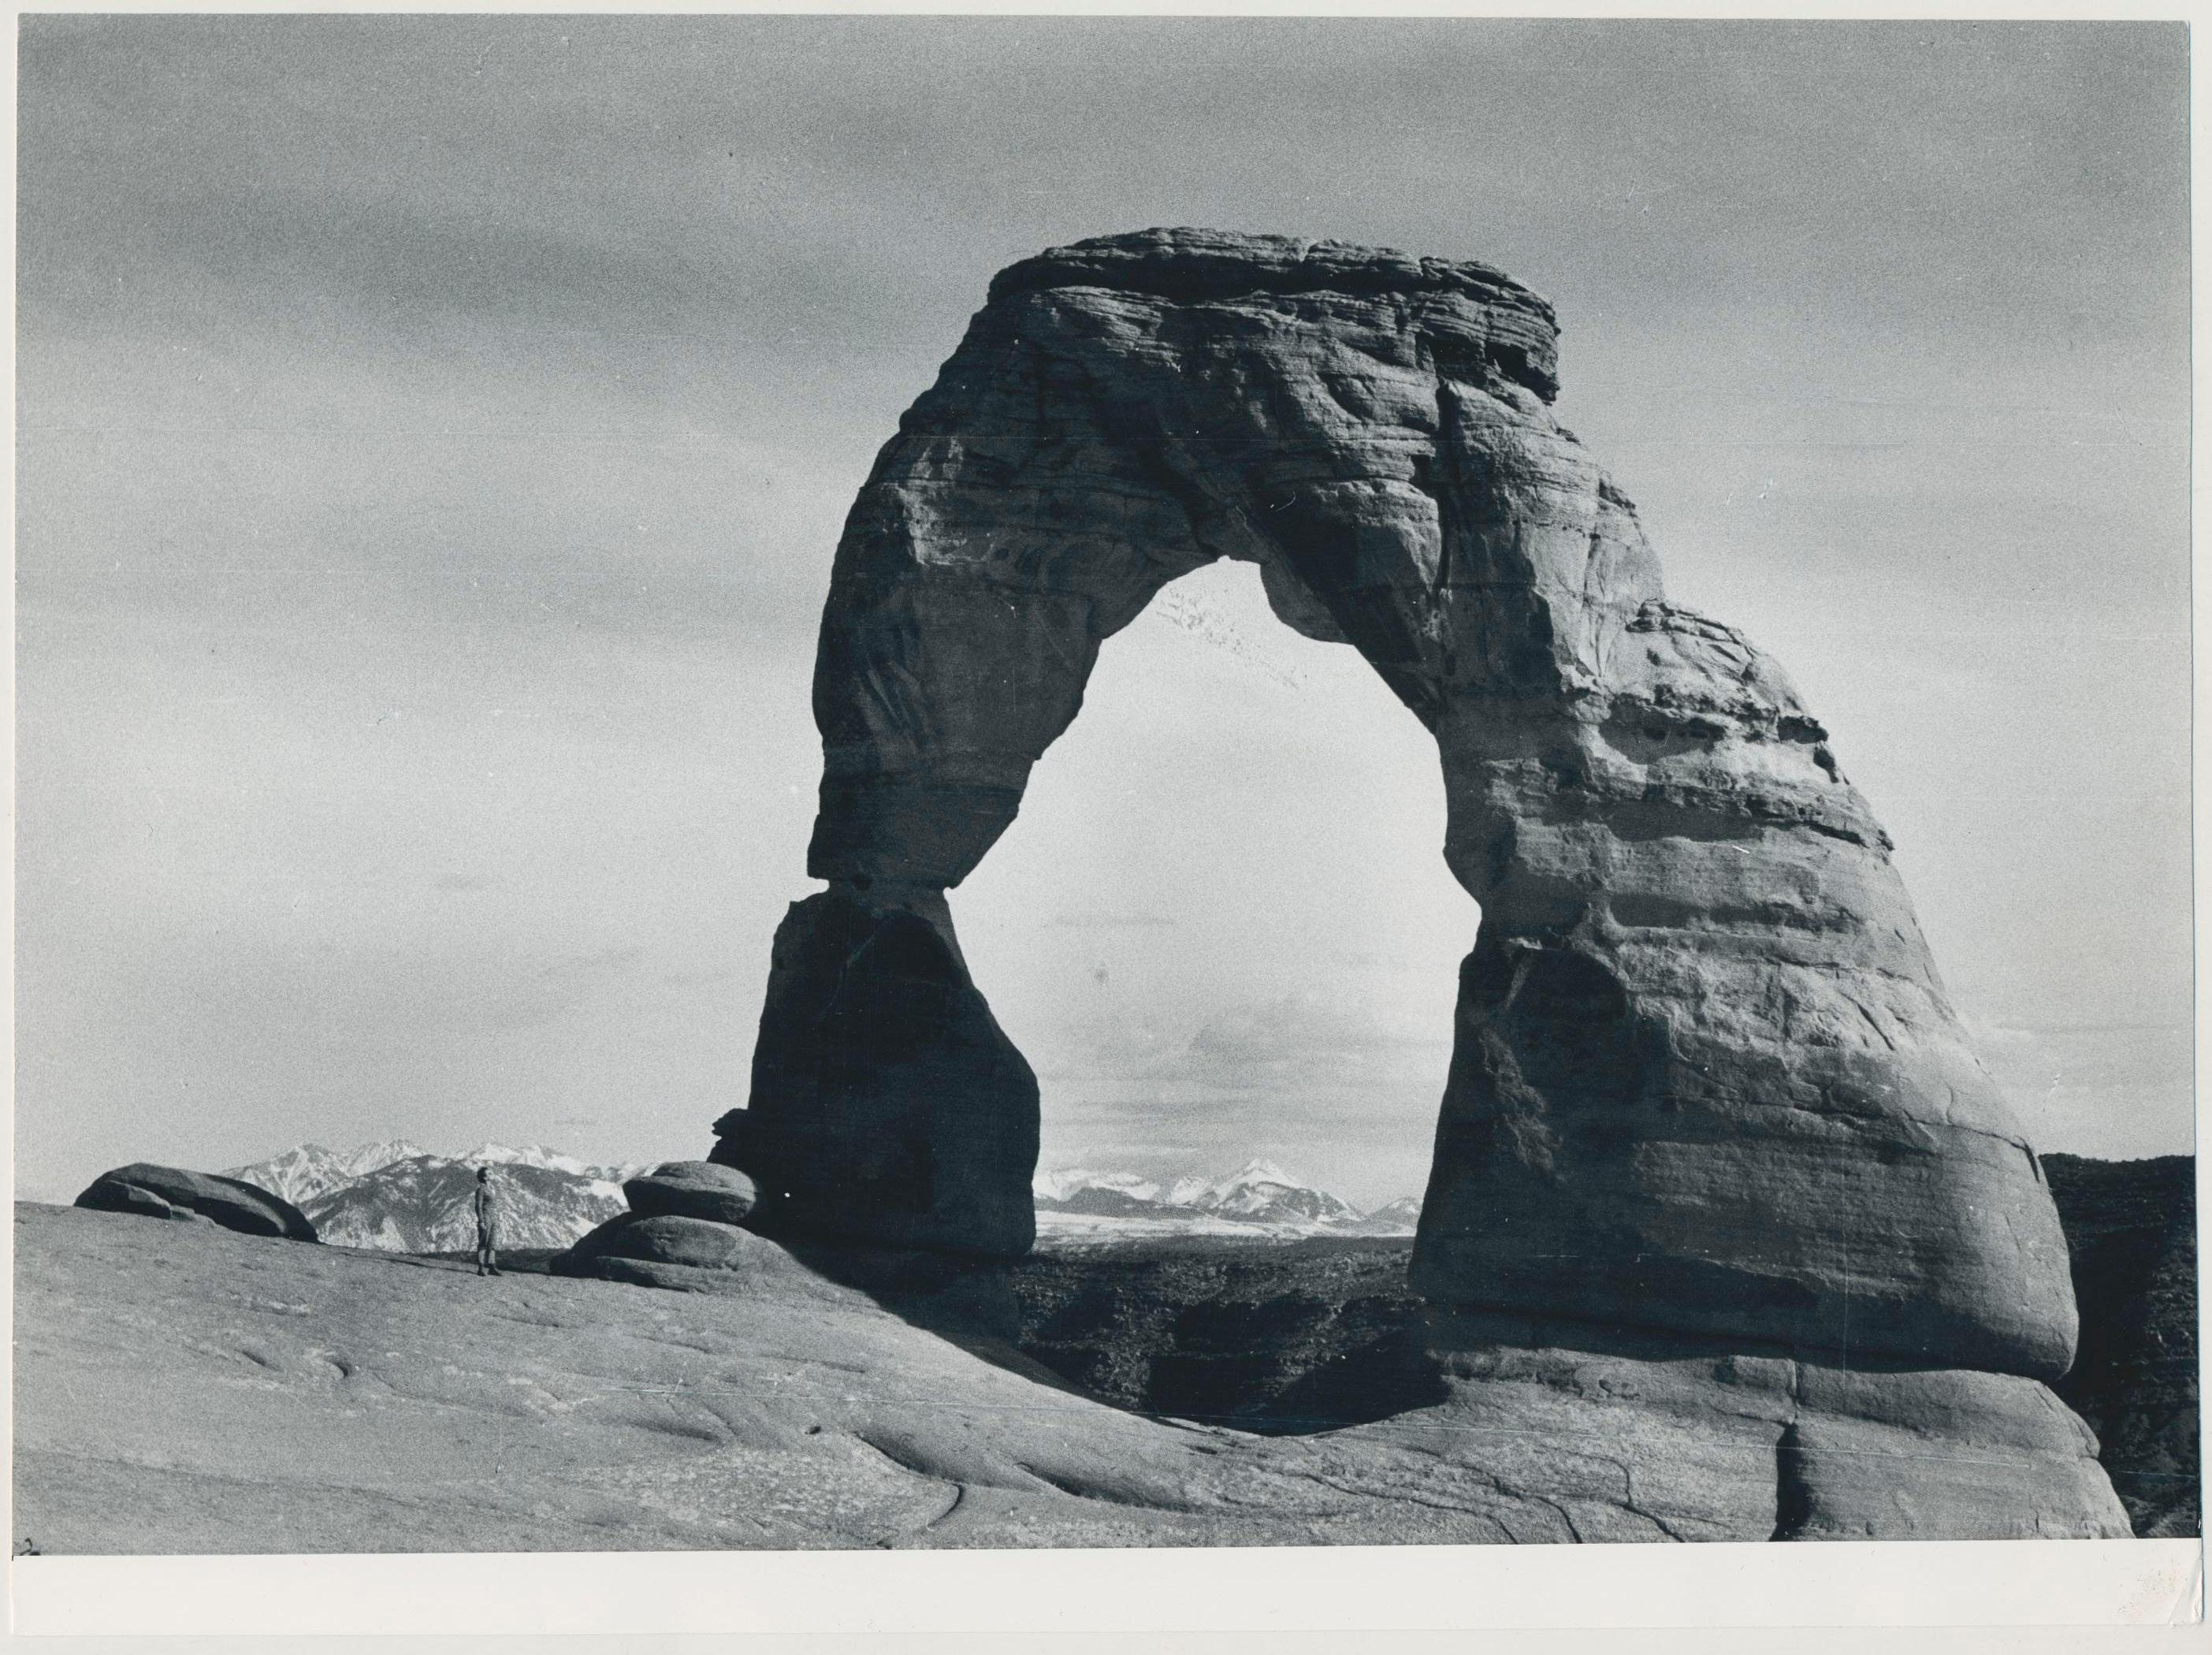 Erich Andres Black and White Photograph - Arches Nationalpark, Utah, Black and White, USA 1960s, 17, 3 x 23, 3 cm